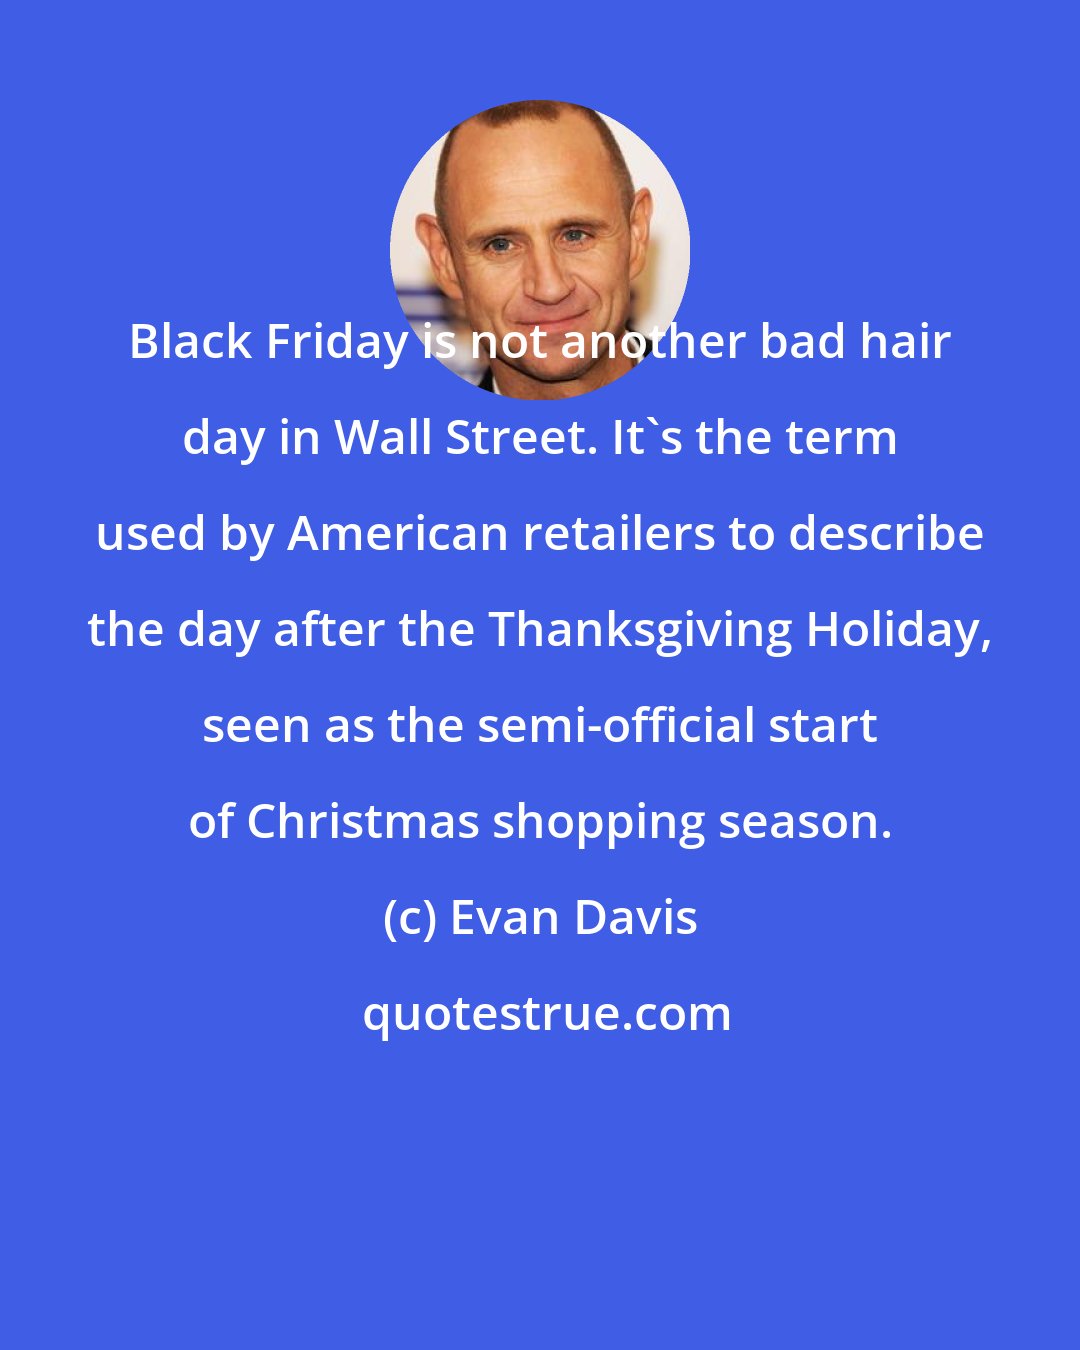 Evan Davis: Black Friday is not another bad hair day in Wall Street. It's the term used by American retailers to describe the day after the Thanksgiving Holiday, seen as the semi-official start of Christmas shopping season.